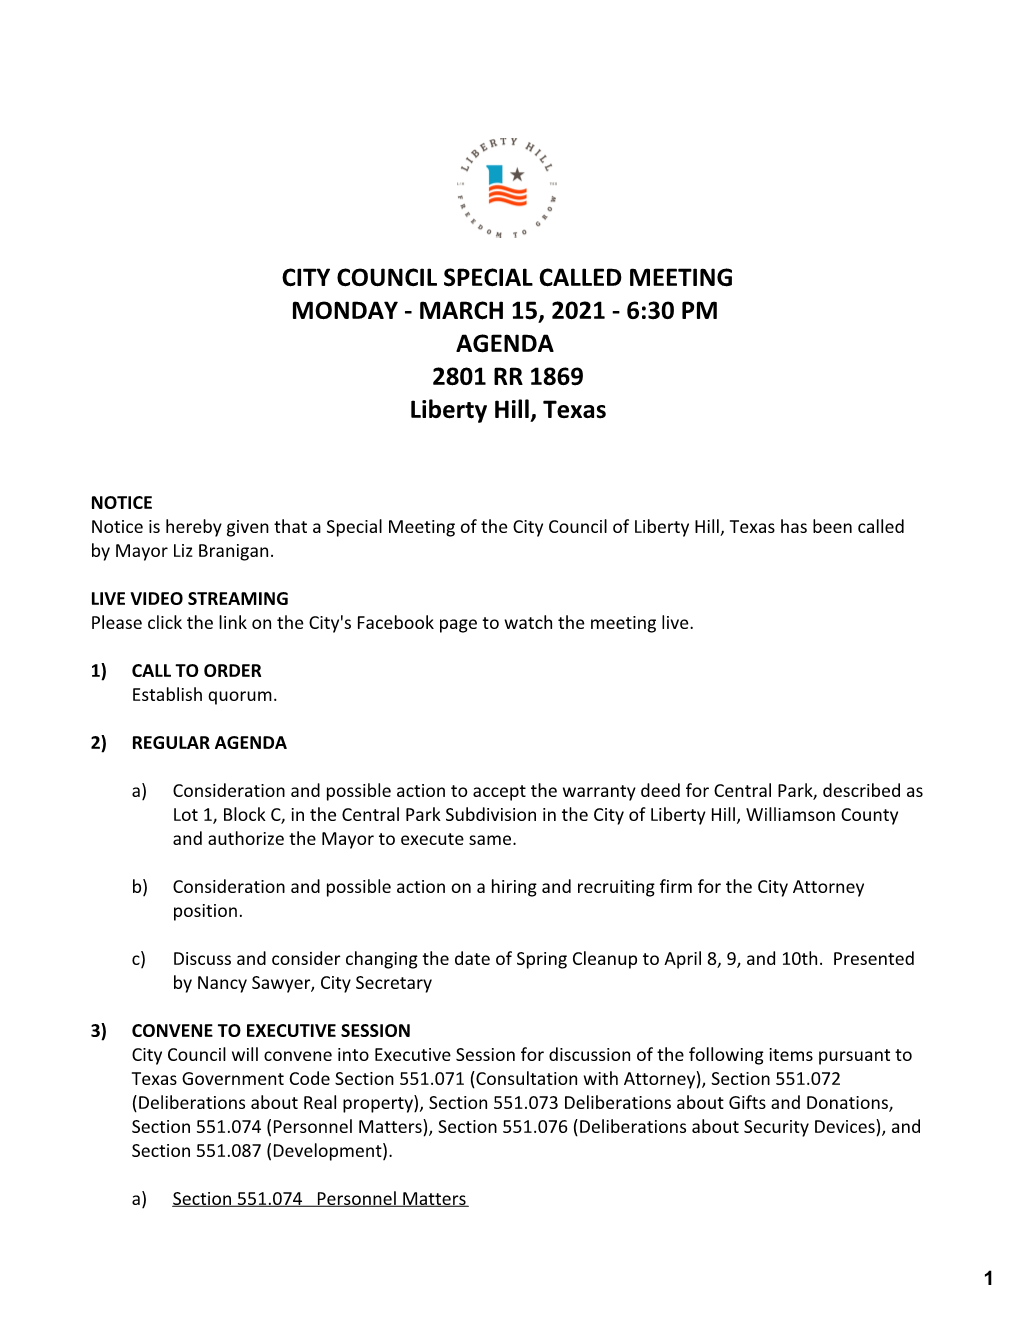 CITY COUNCIL SPECIAL CALLED MEETING MONDAY - MARCH 15, 2021 - 6:30 PM AGENDA 2801 RR 1869 Liberty Hill, Texas